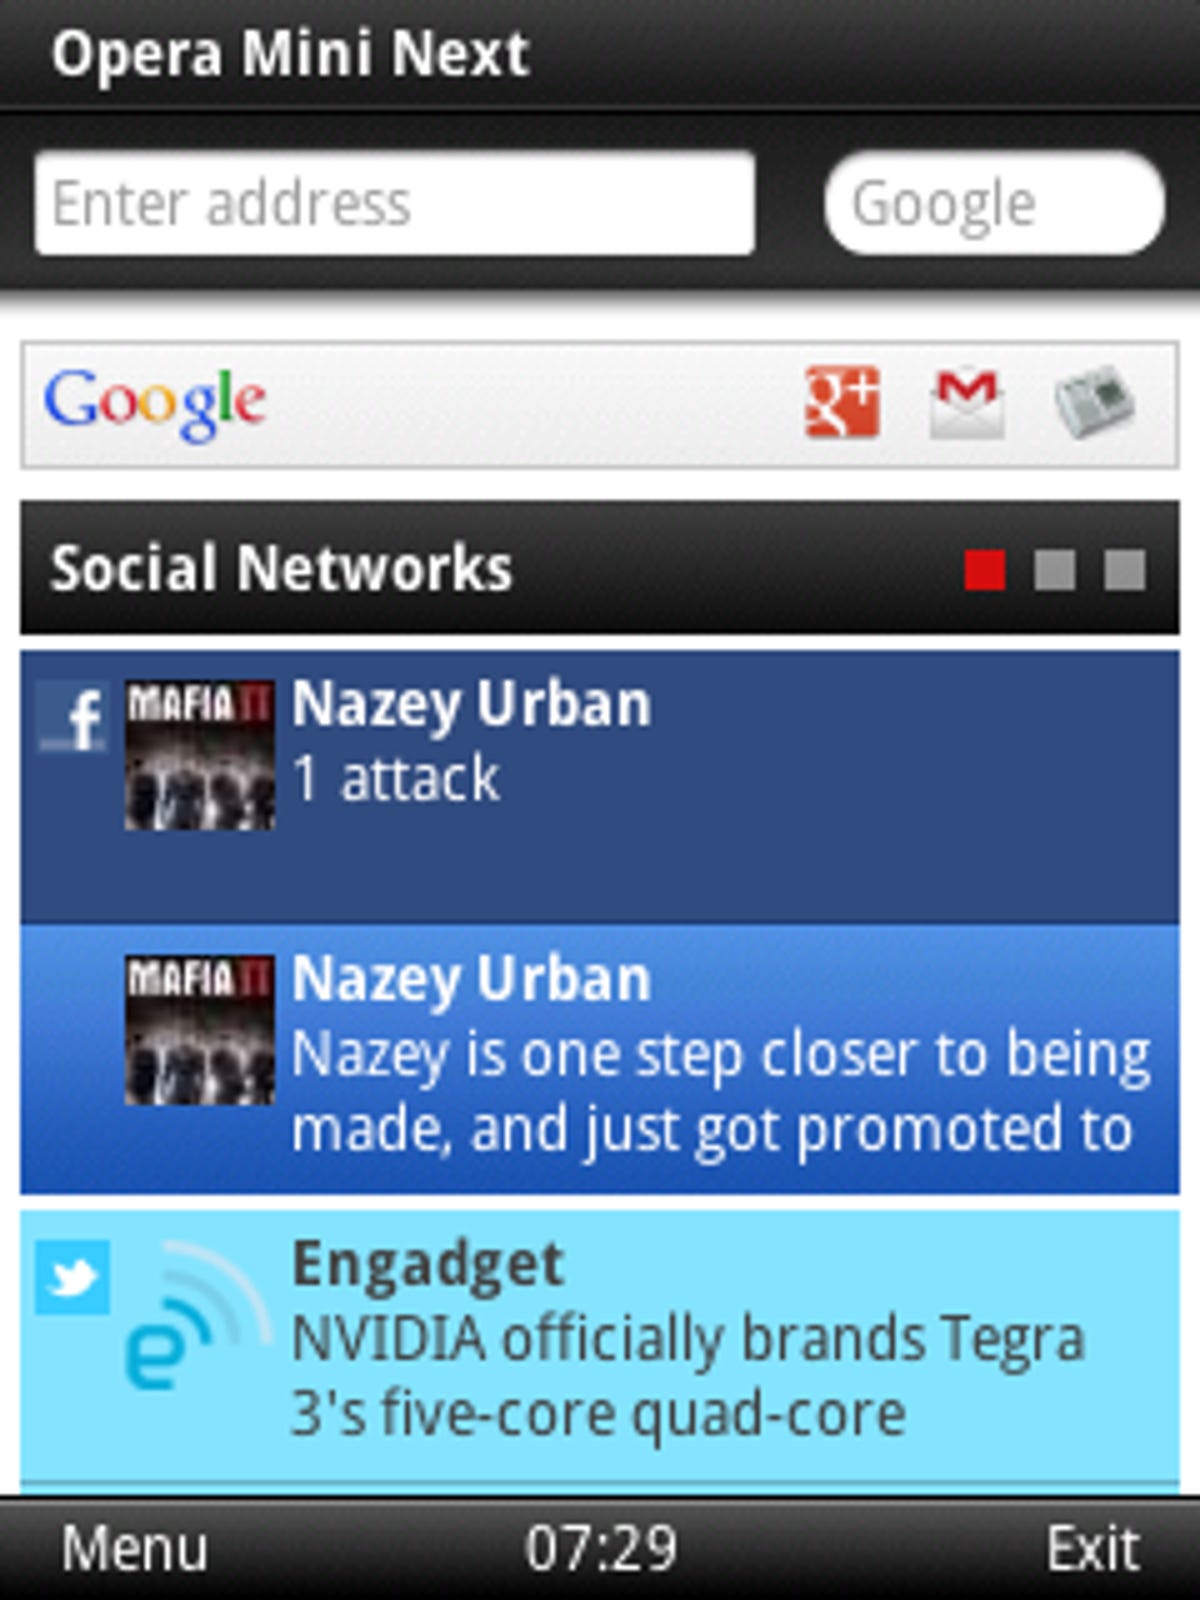 The Home tab keys into site feeds, so you can see site update notifications in Opera Mini without loading the site in full.